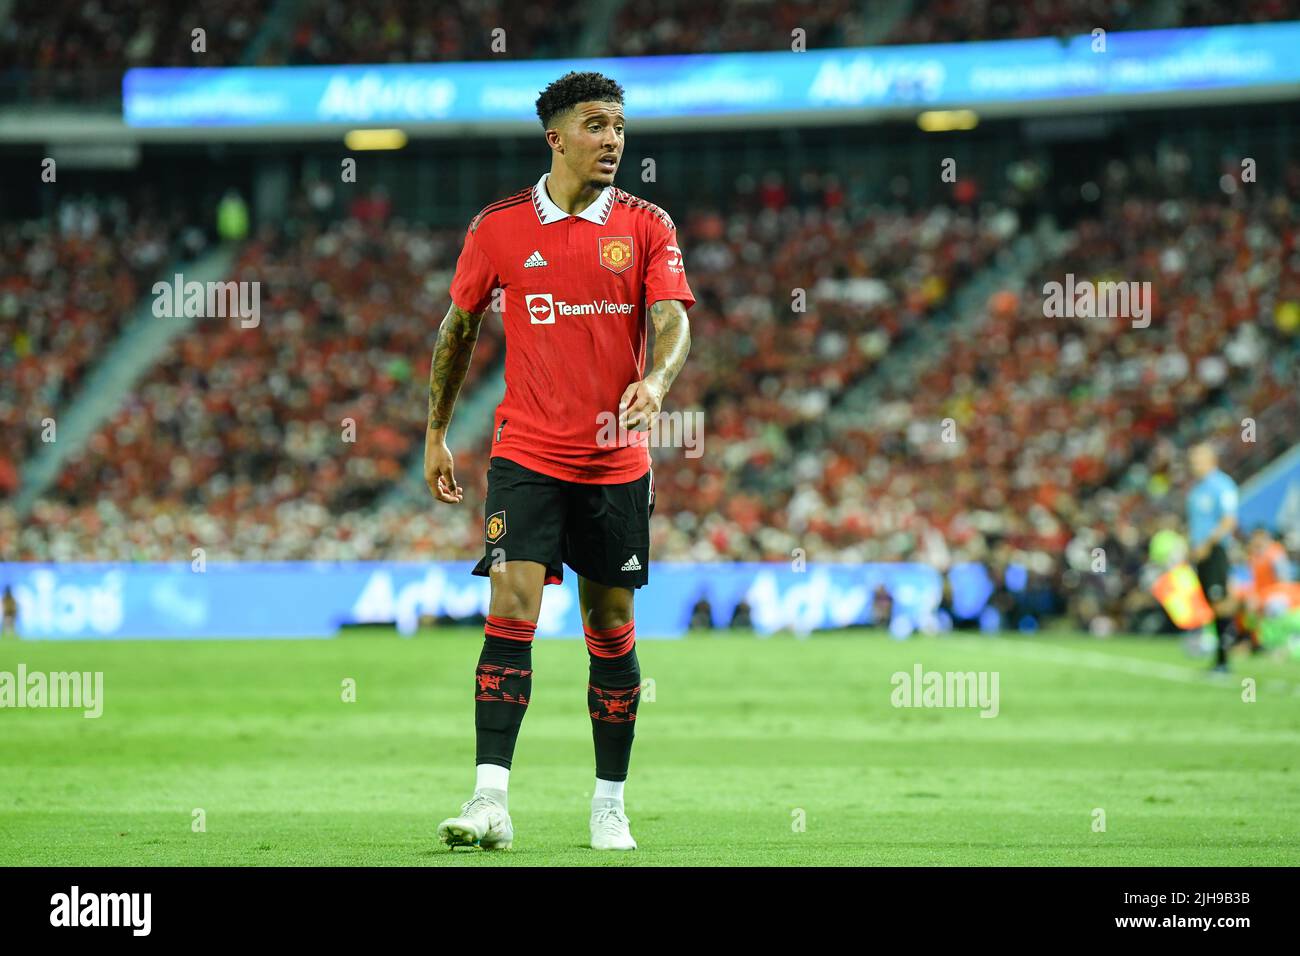 Jadon Sancho of Manchester United seen in action during the preseason match between Manchester United against Liverpool at Rajamangala stadium.(Final score; Manchester United 4:0 Liverpool). Stock Photo